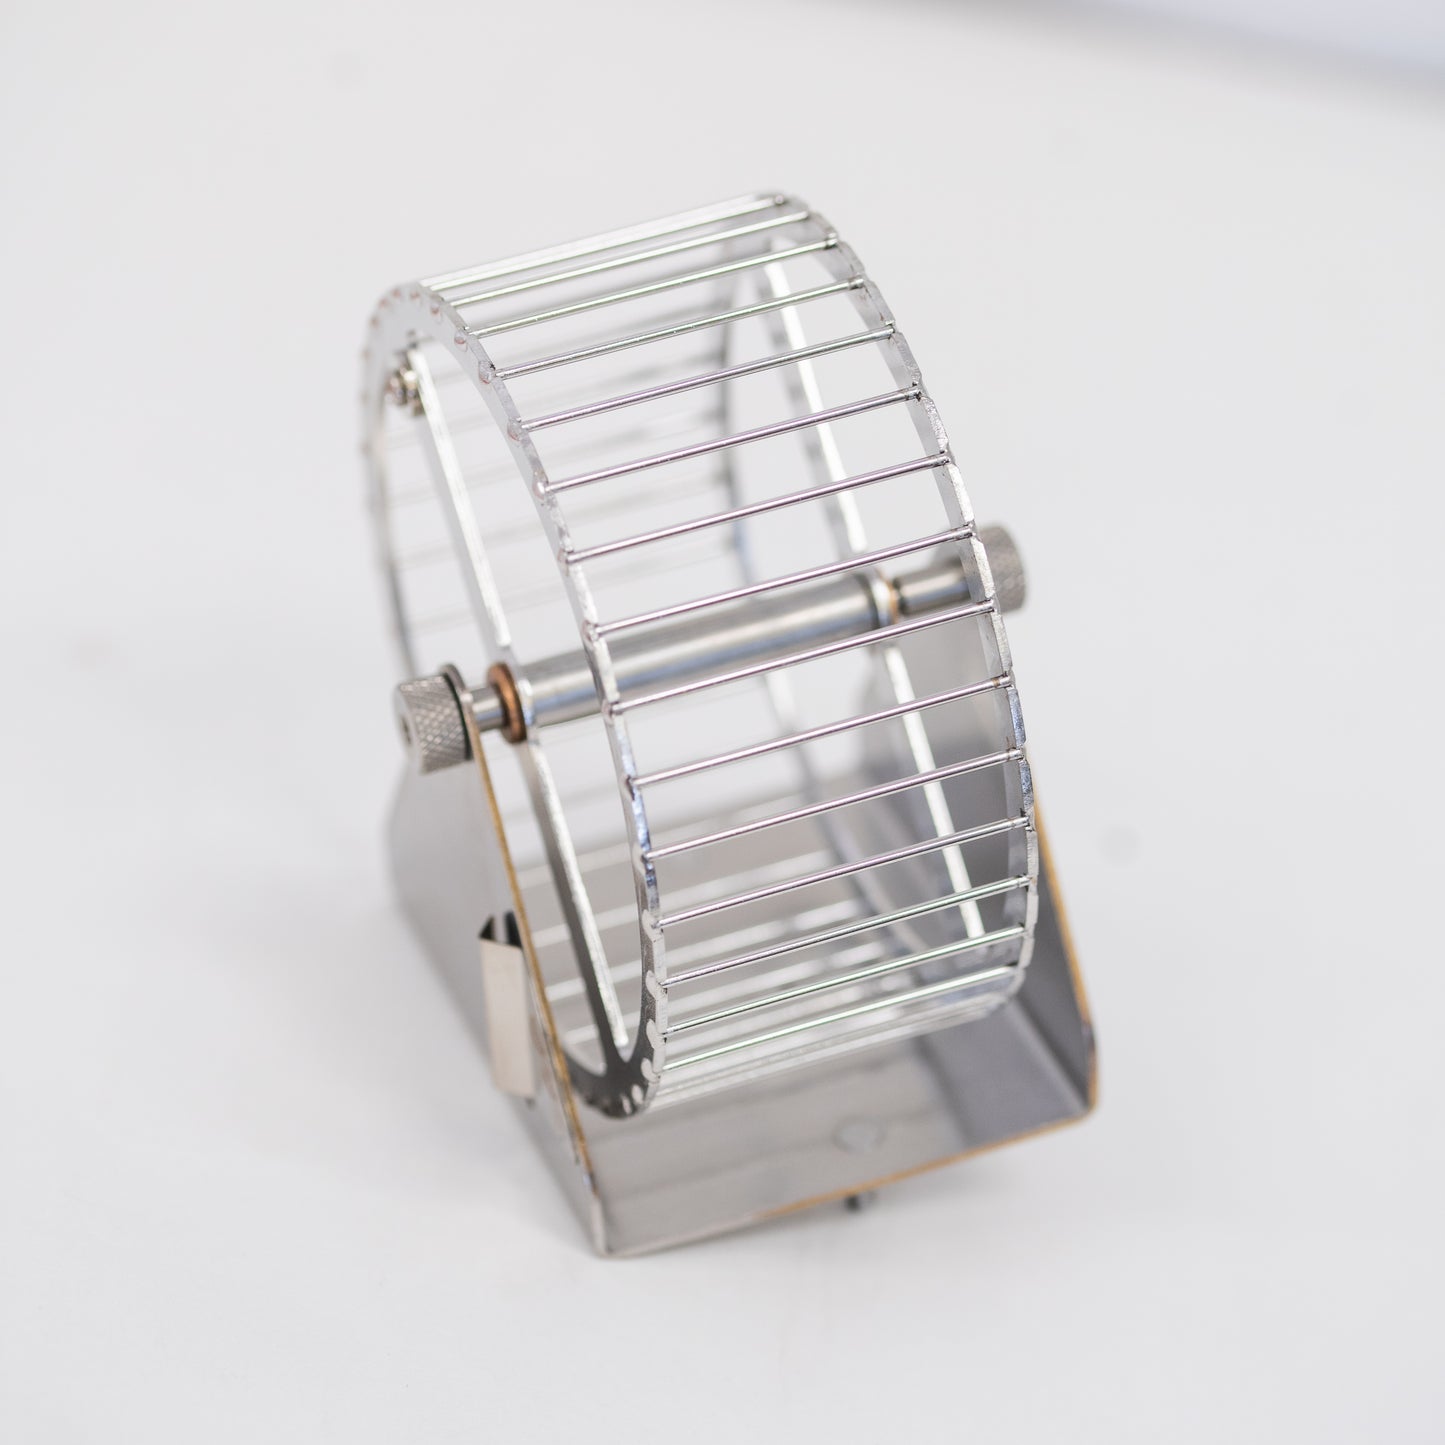 In-Cage Running Wheels with Reed Switch Include Mouse (610-0003-00)